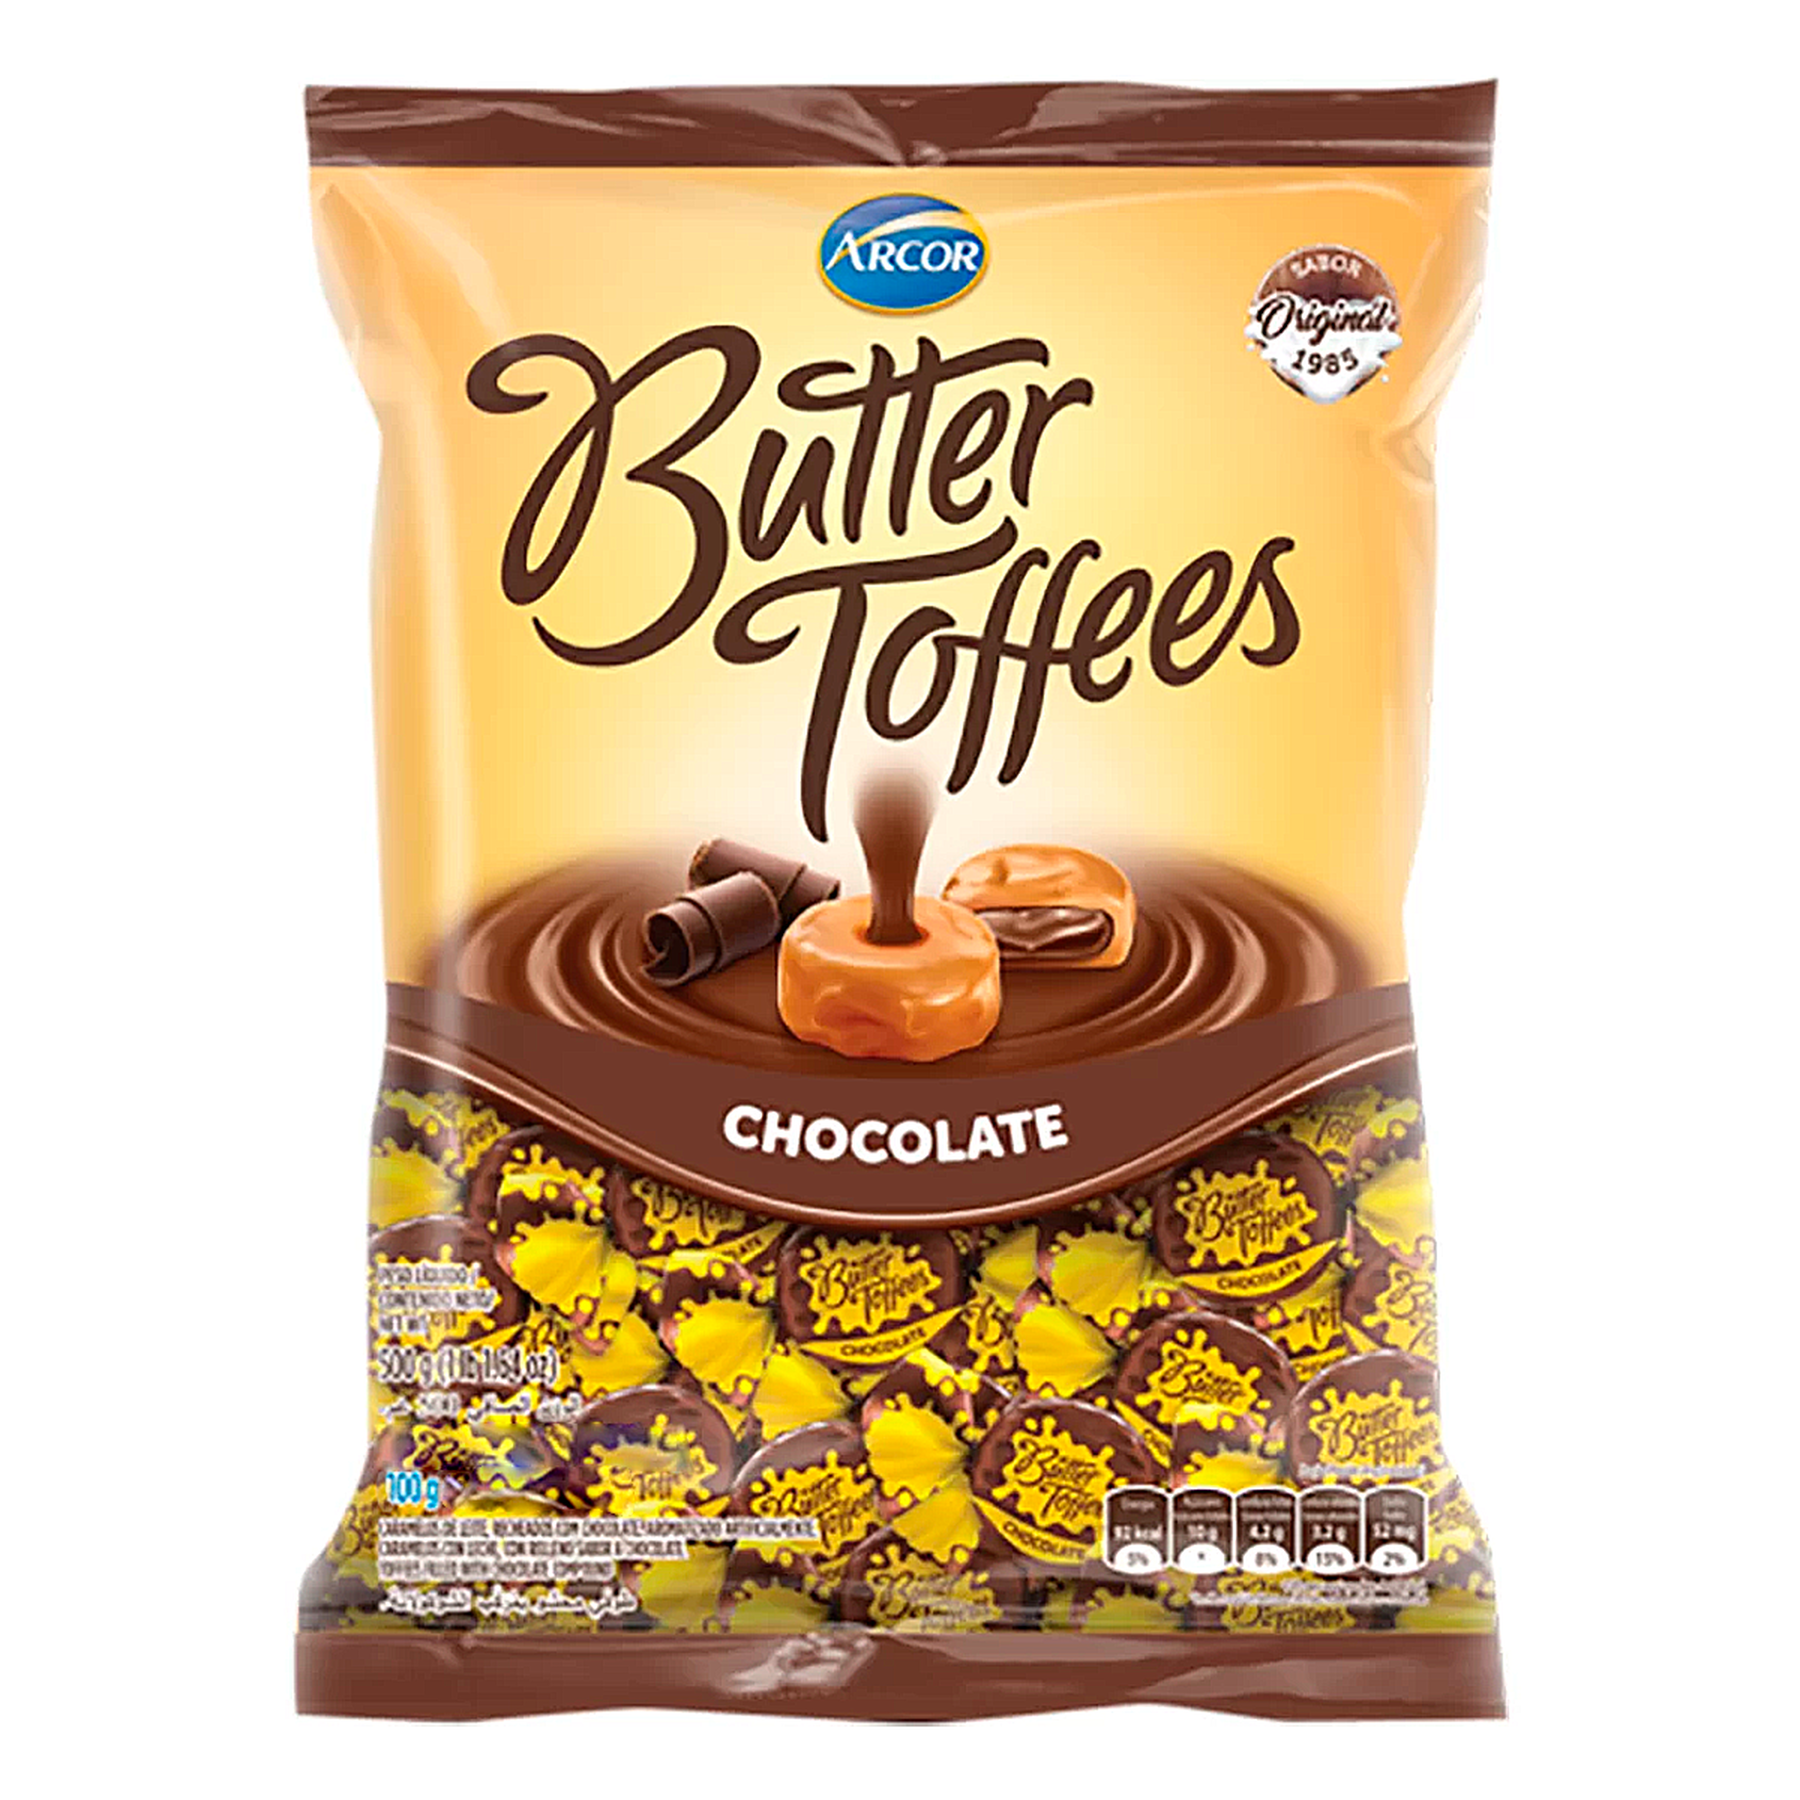 Bala Butter Toffees Chocolate Arcor Pacote 100g